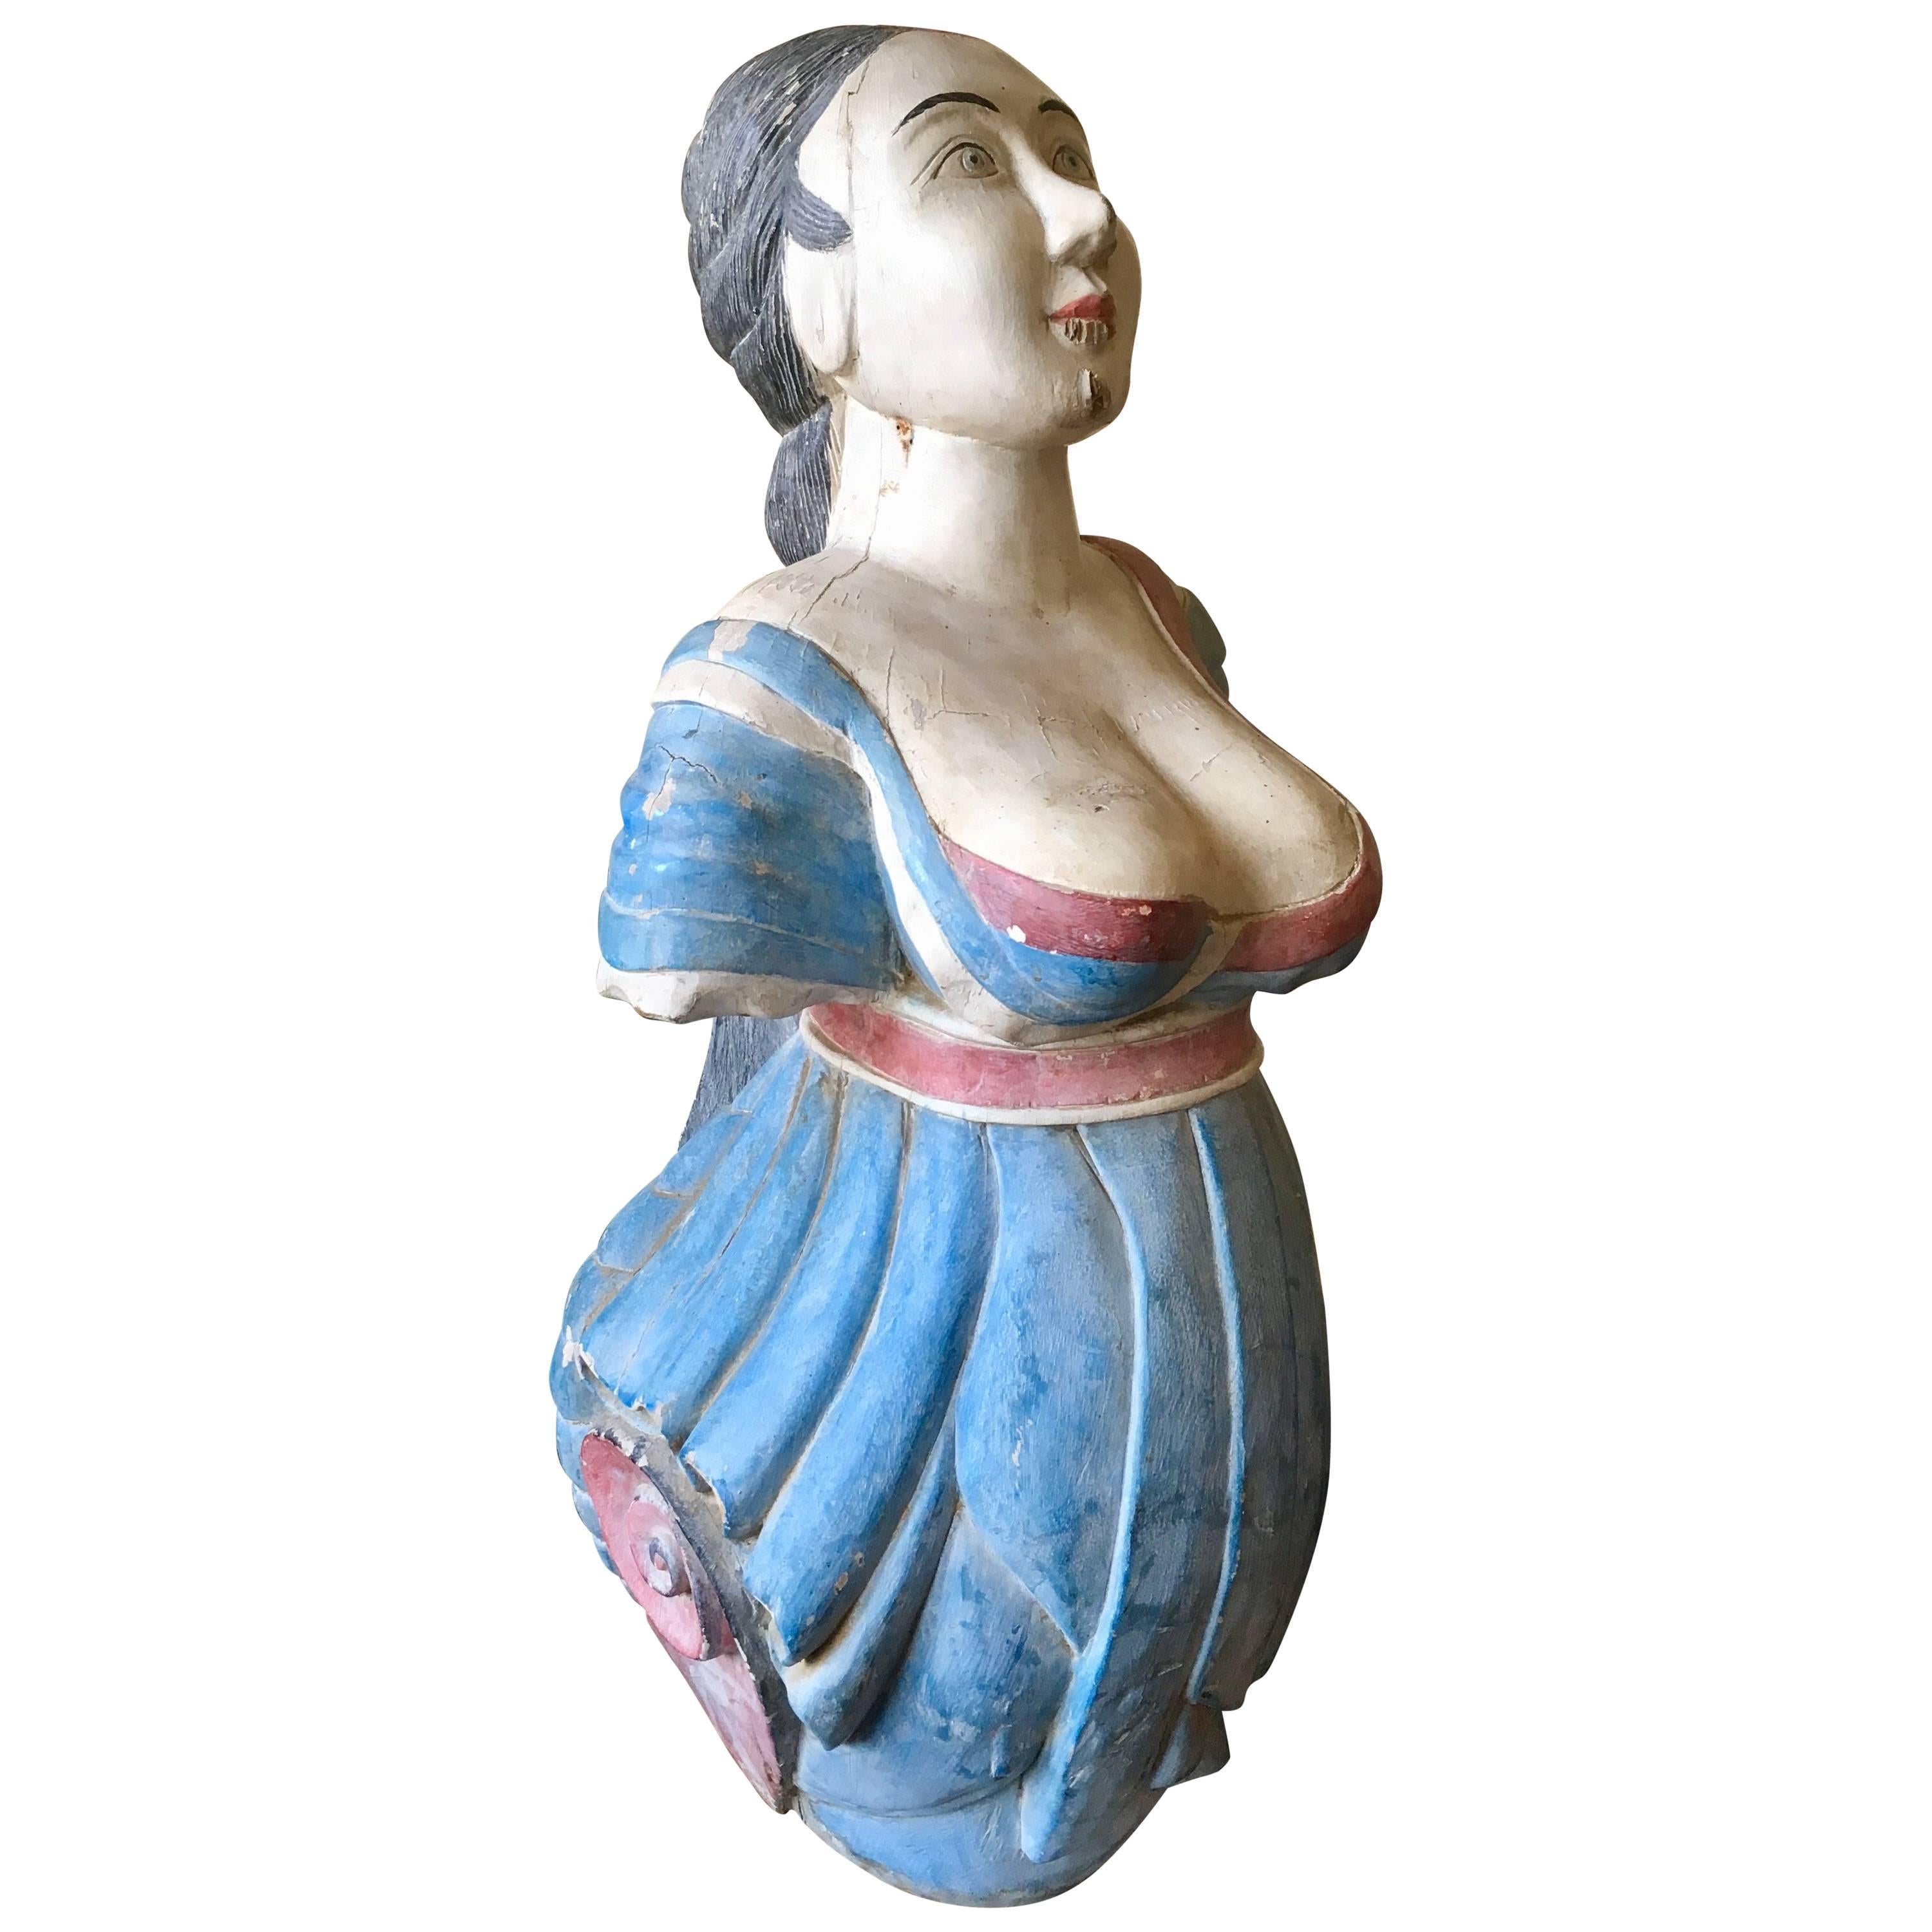 Antique Carved and Decorated Ship's Figurehead, circa 1890